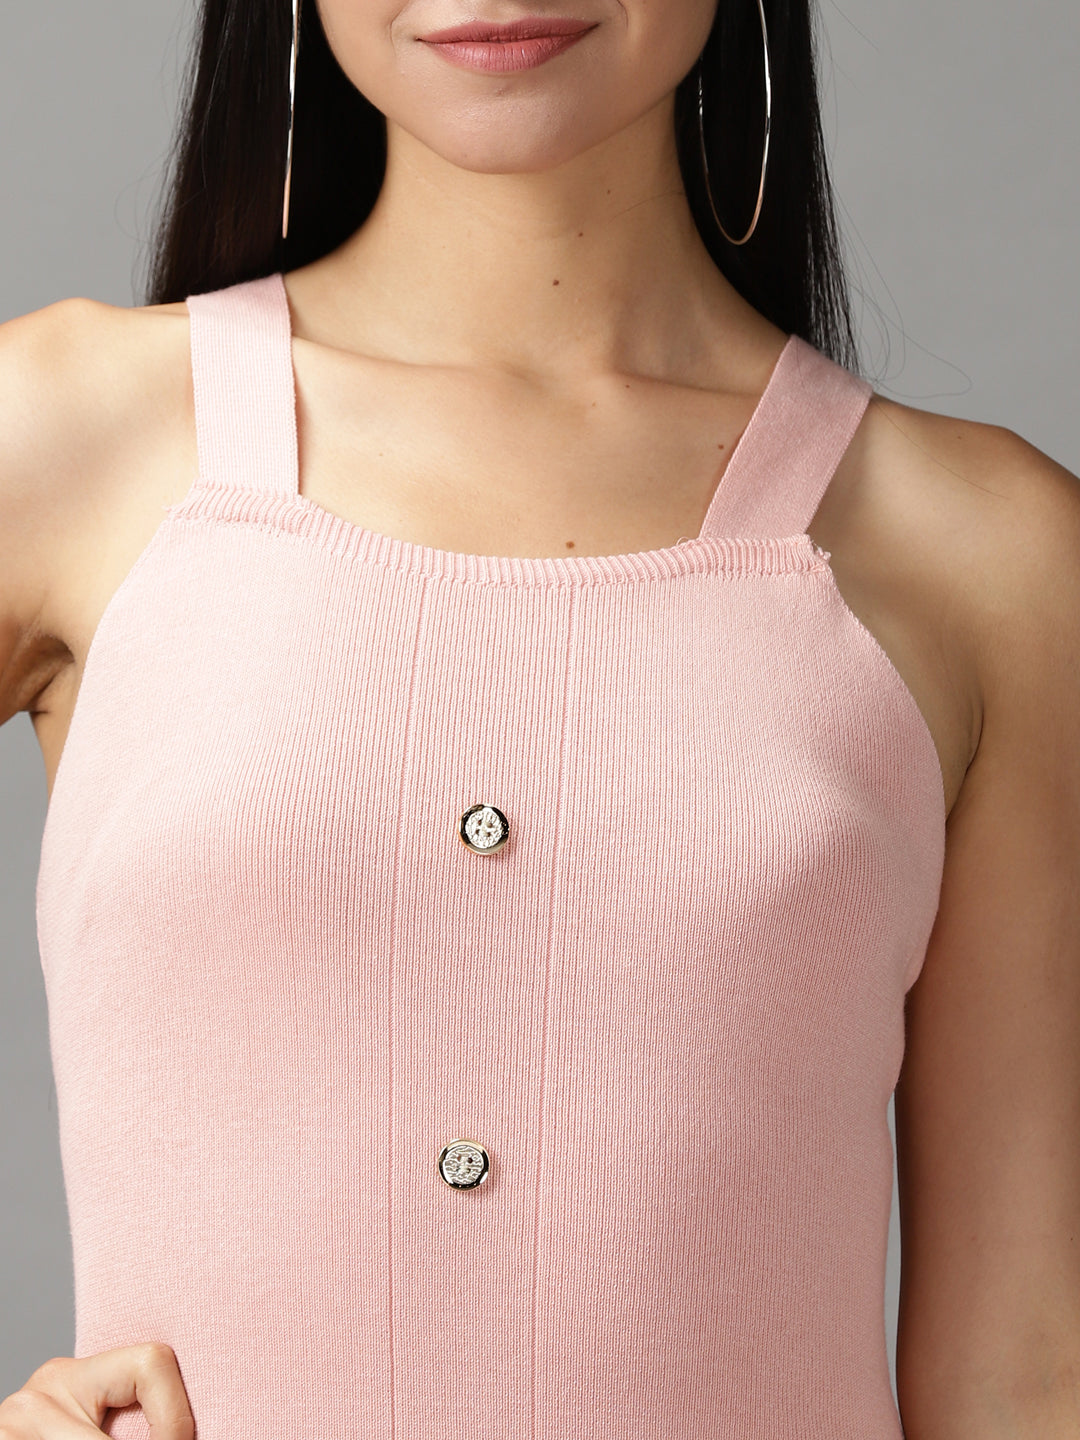 Women's Pink Solid Bodycon Dress